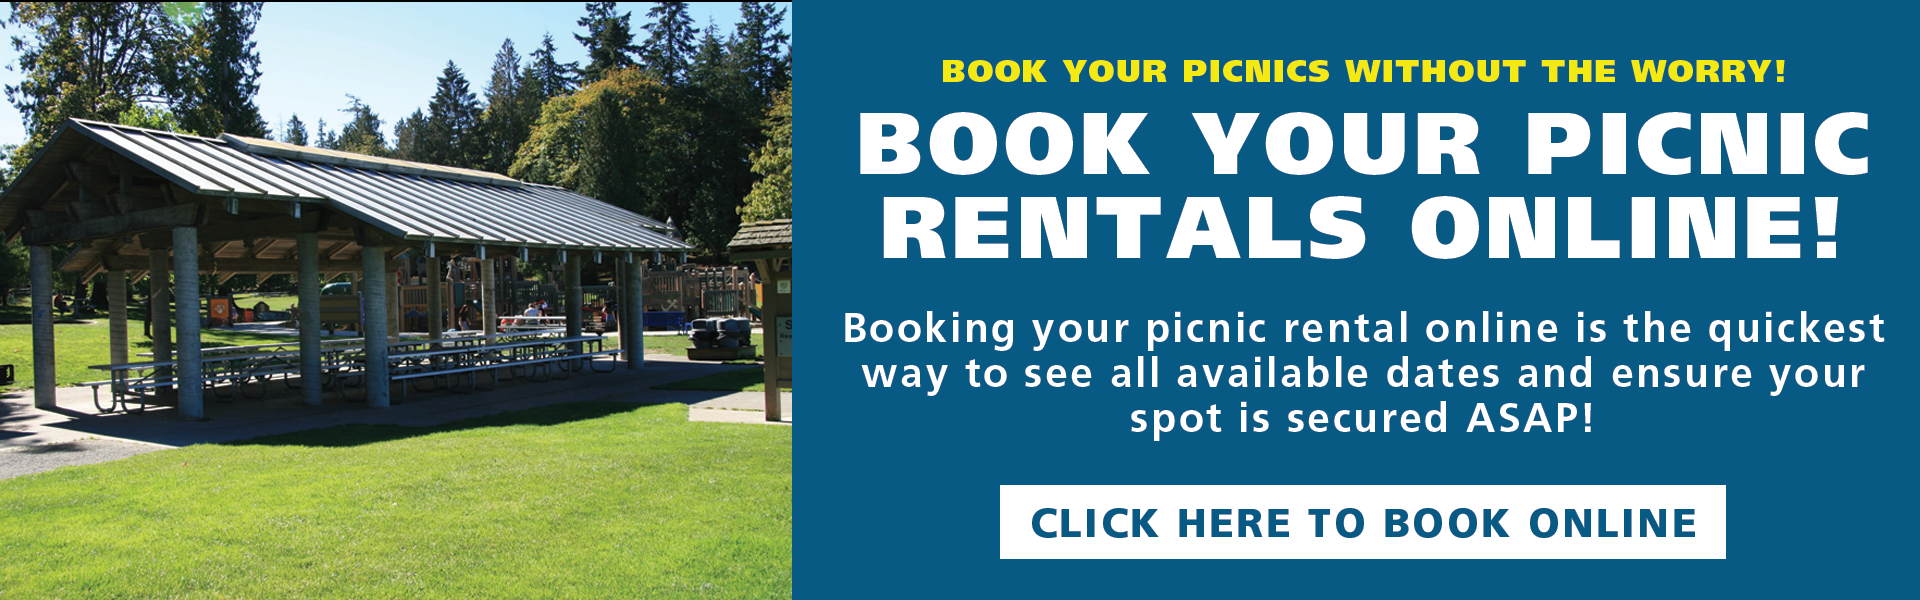 Federal Way Parks and Recreation Picnic Rentals Shelter